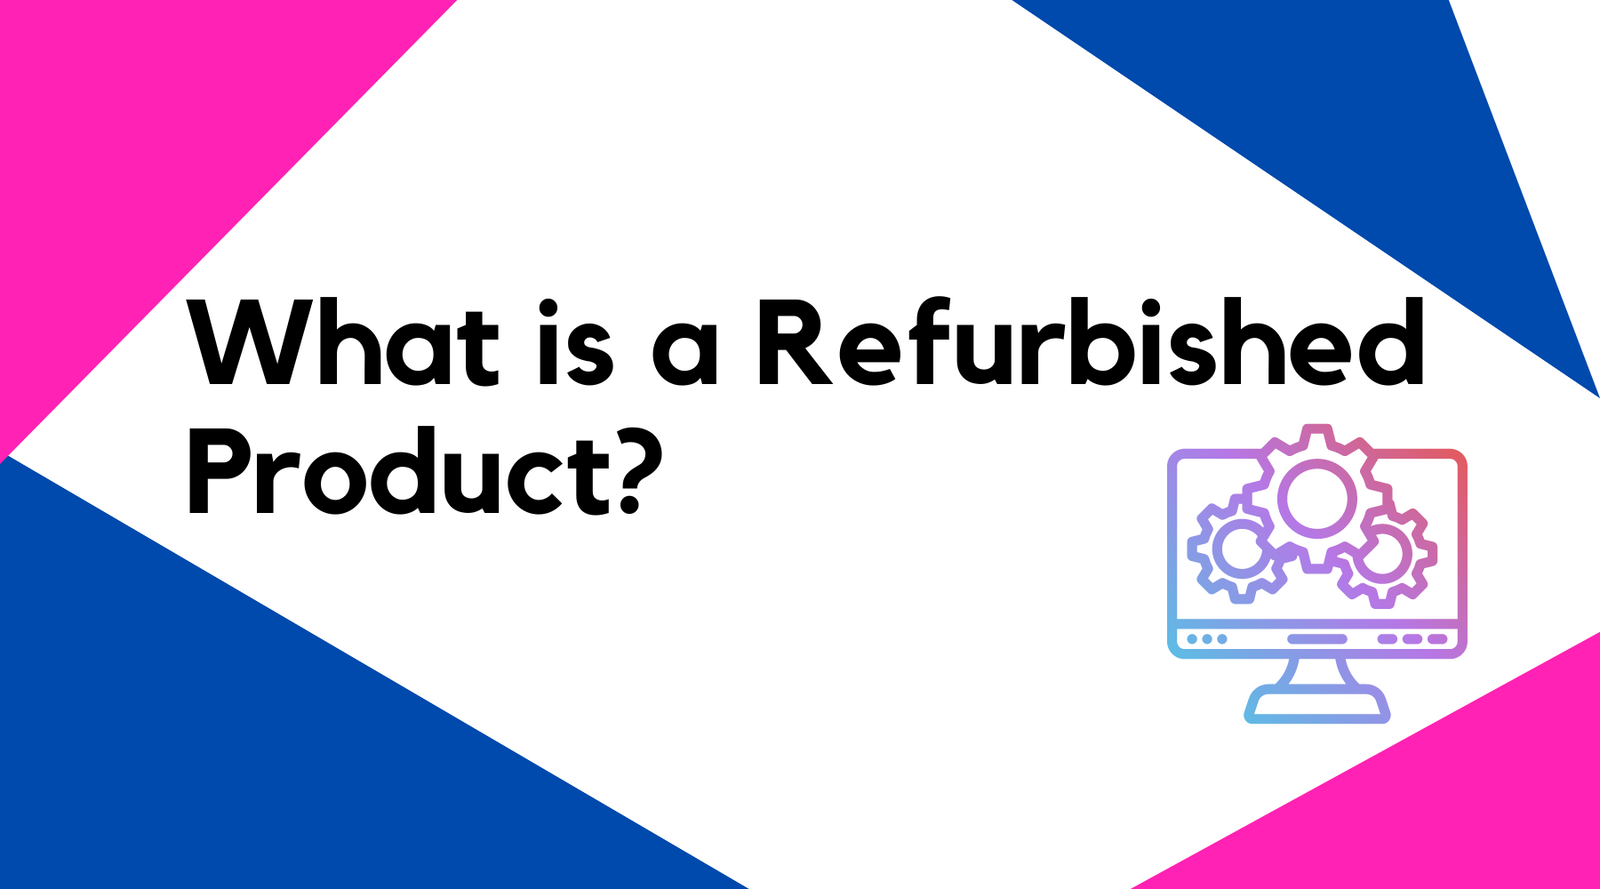 What is a Refurbished Product?